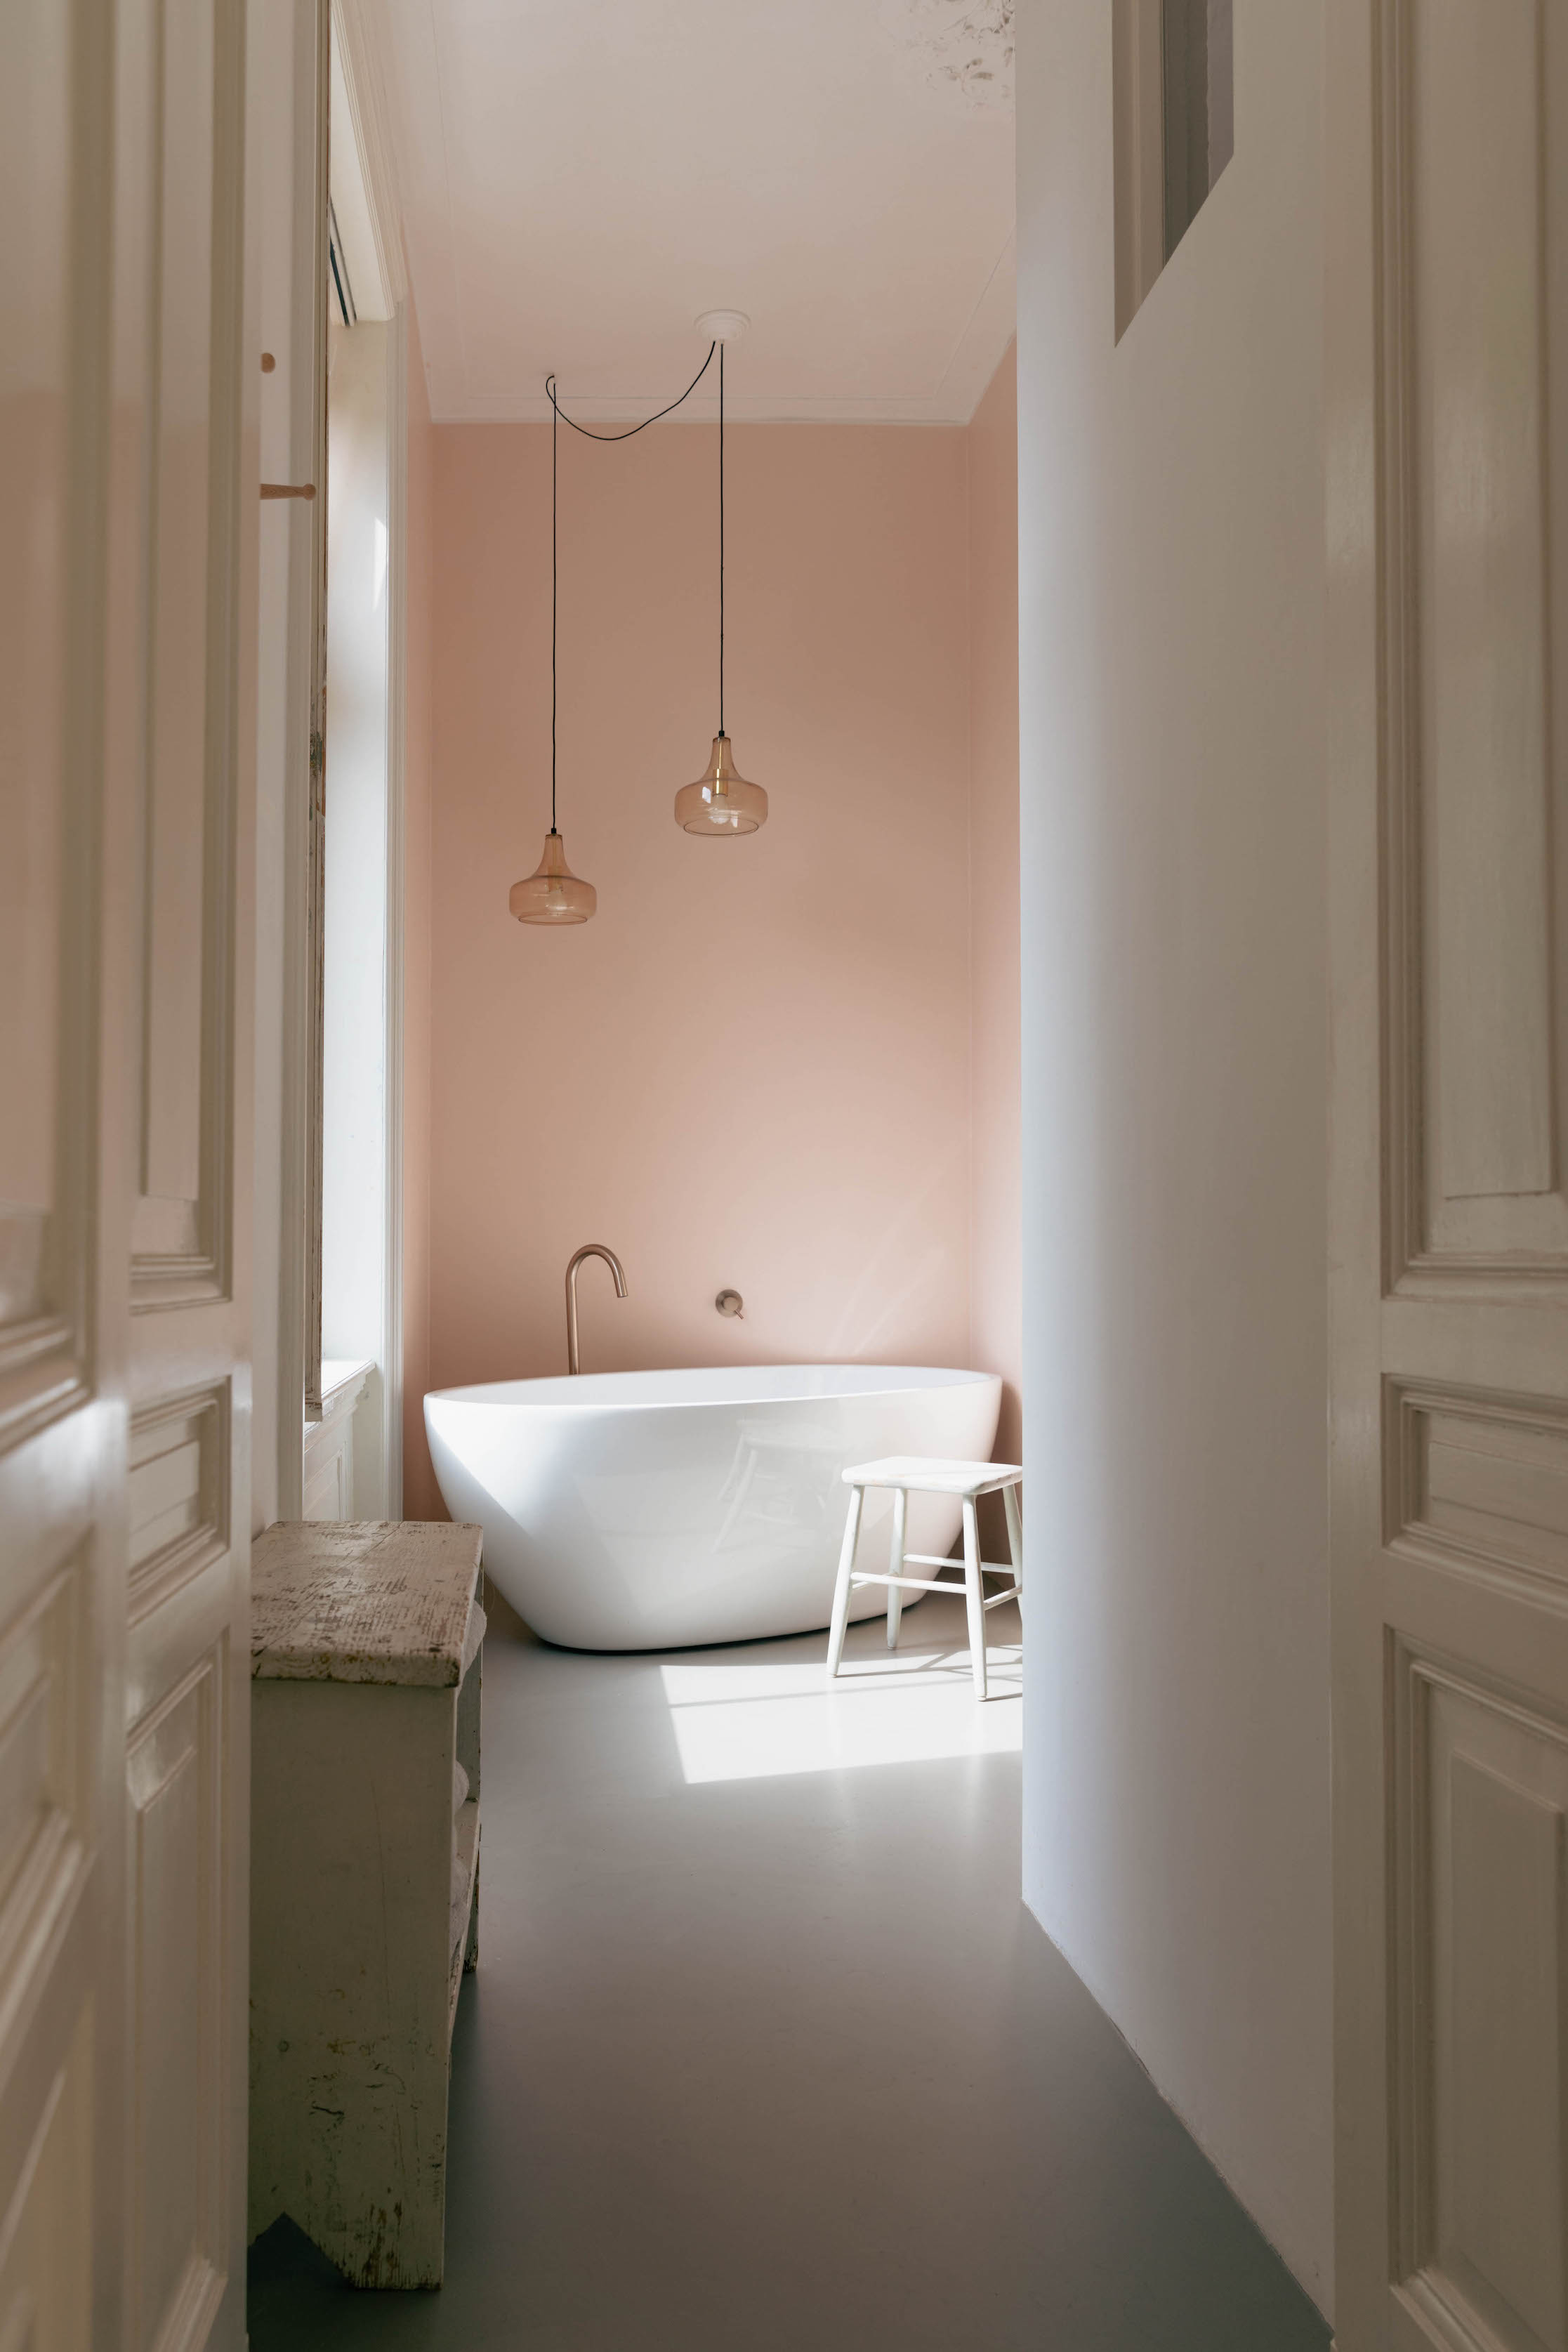 the wall behind the tub is painted pink peach from vestingh. 23